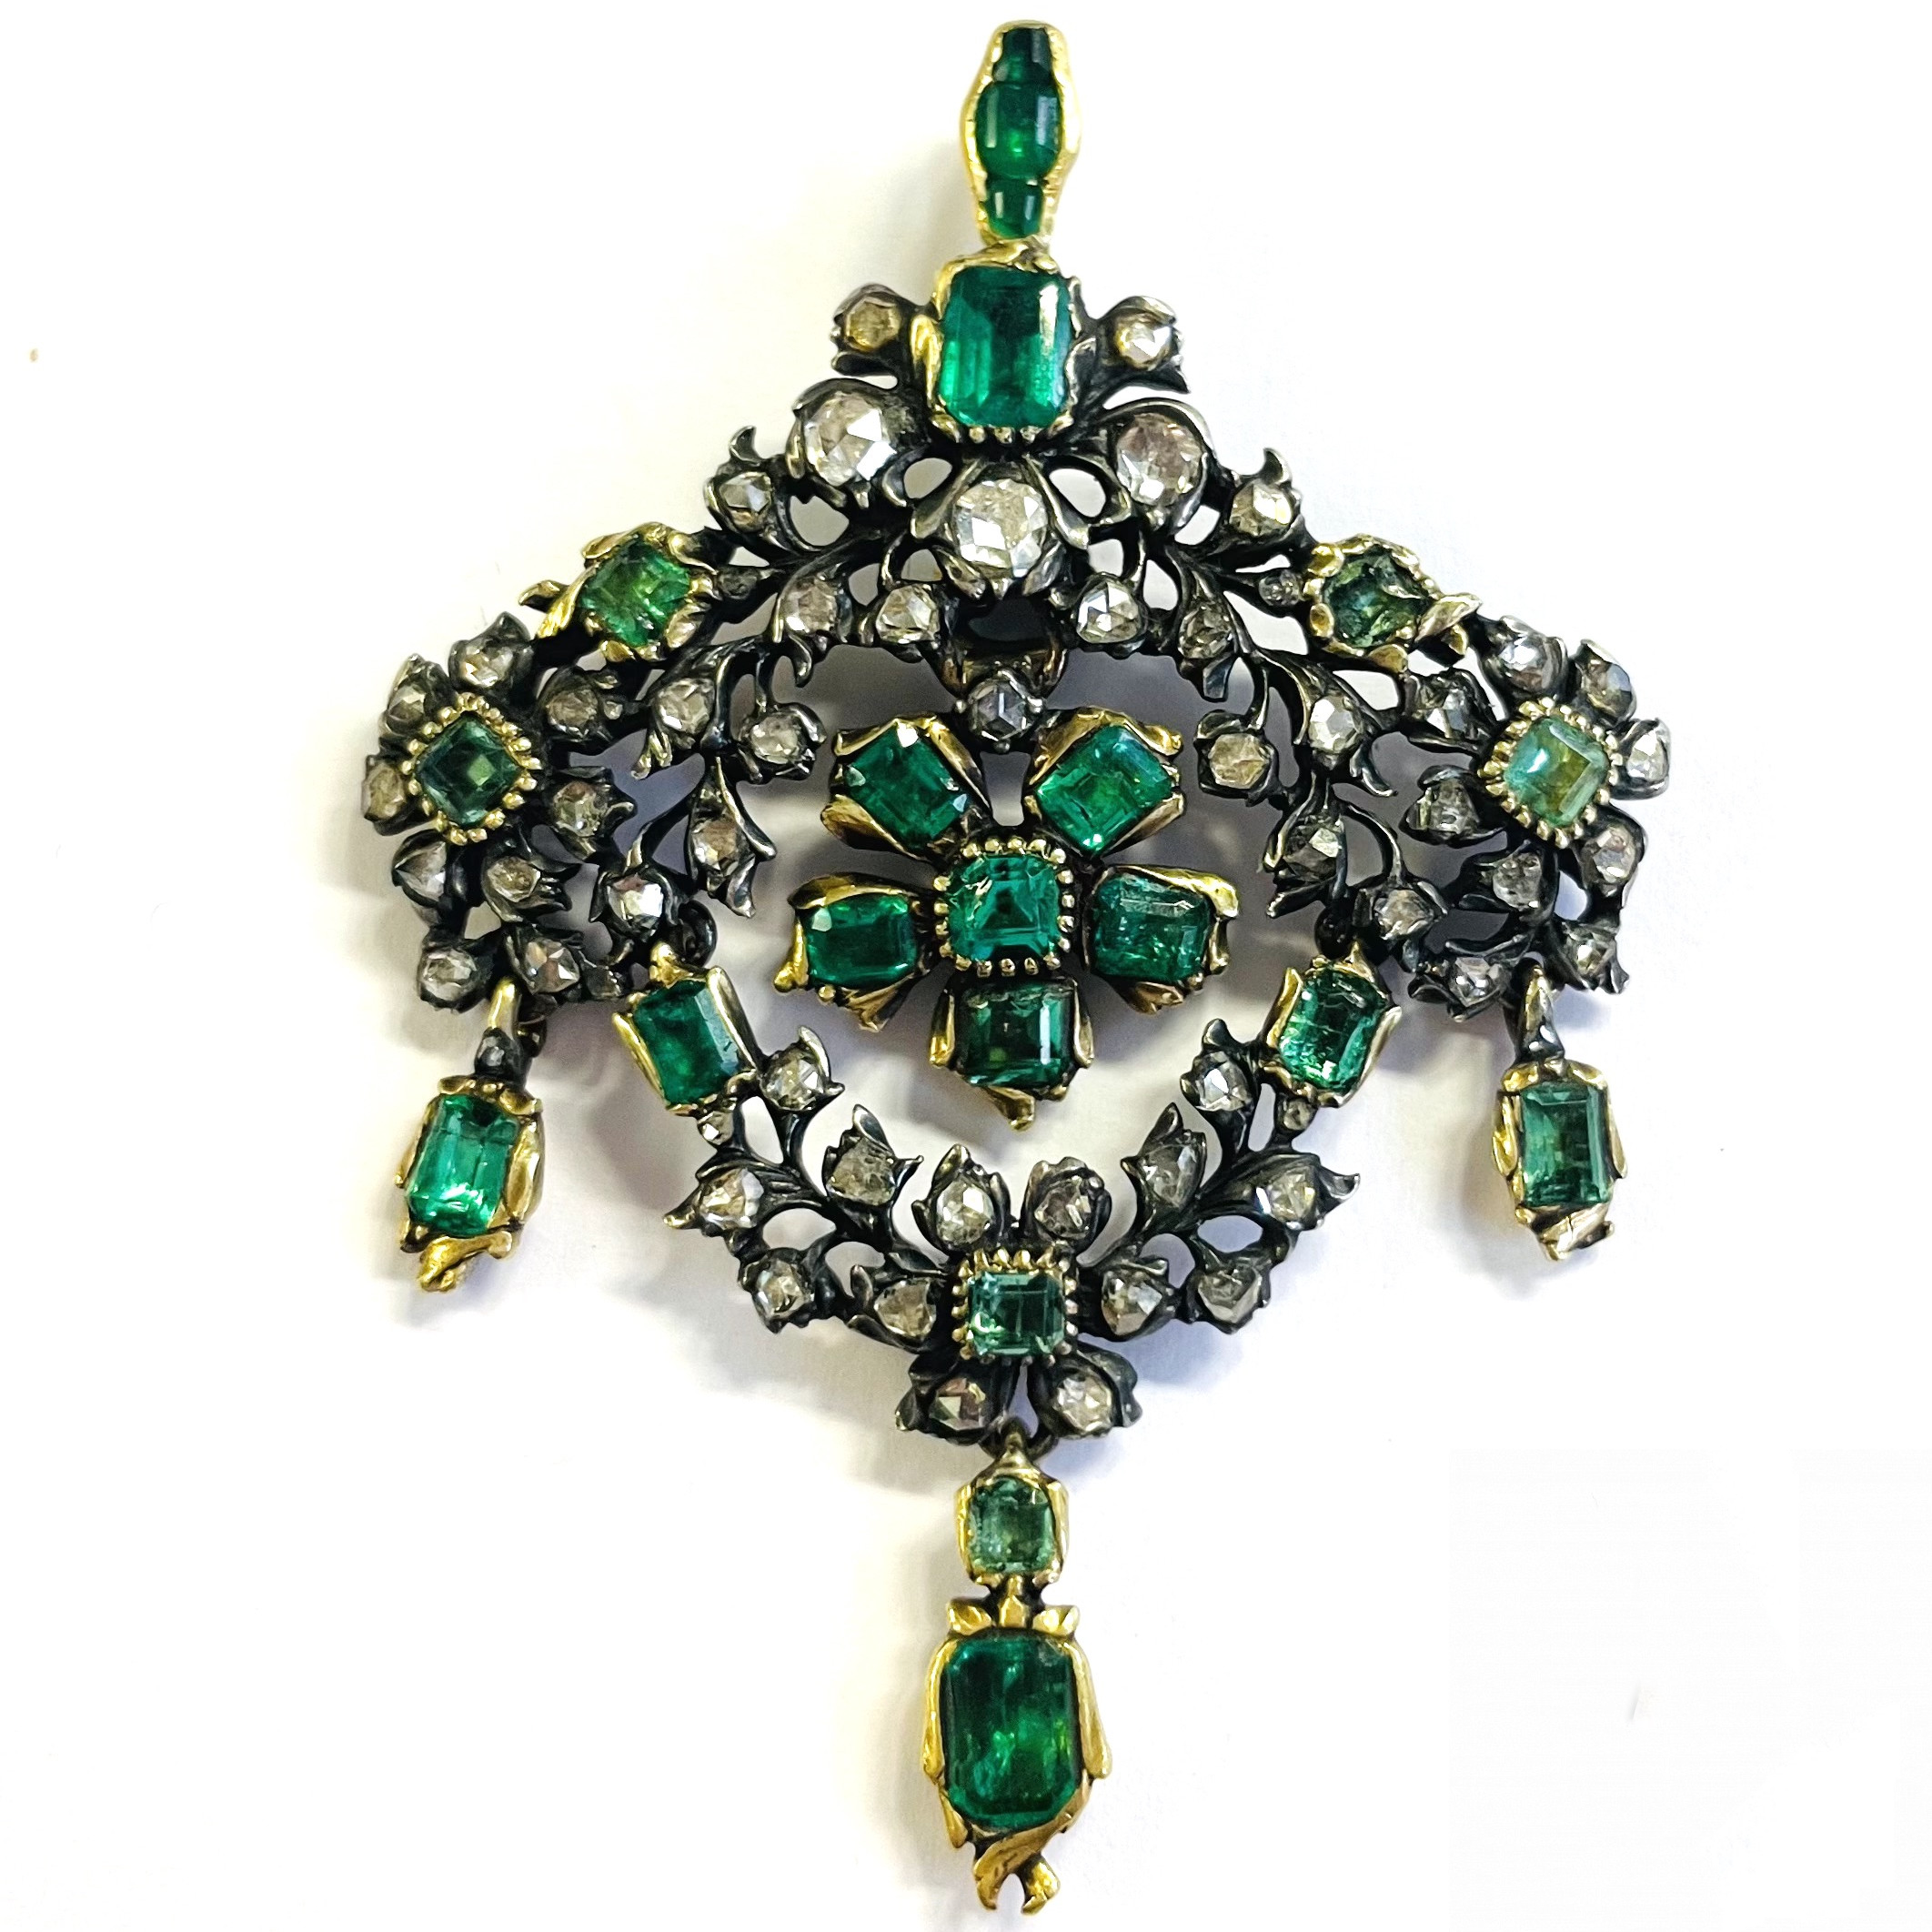 example of closed back setting (front of jewelry)